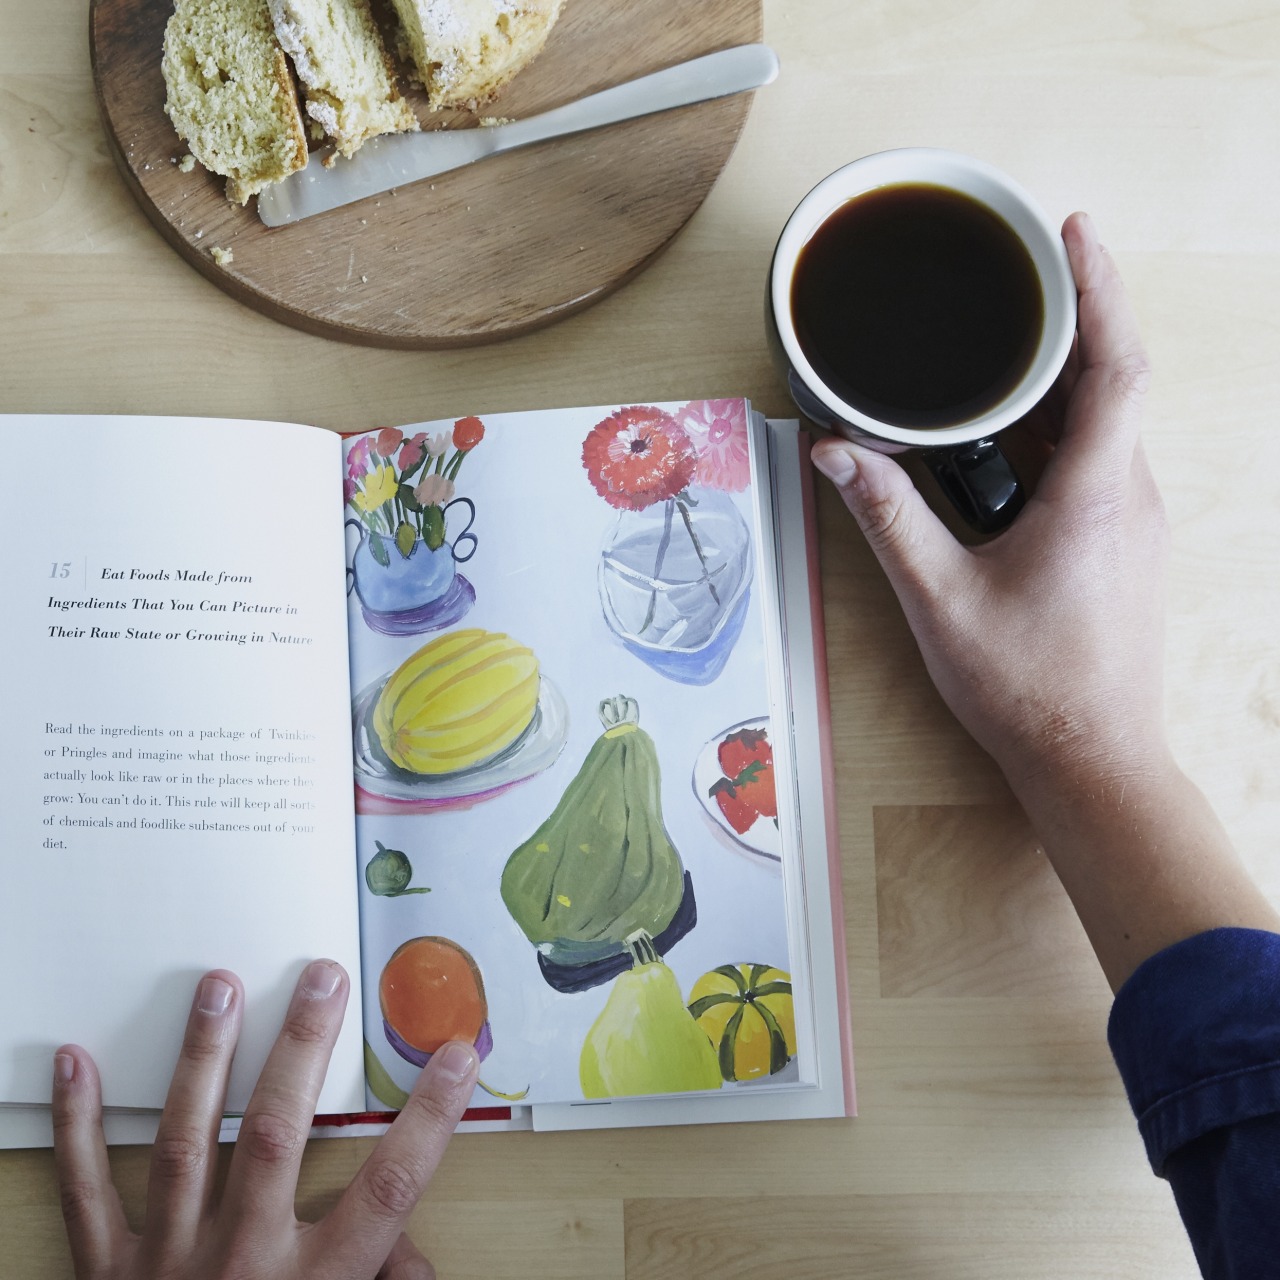 Our Coffee Table: Michael Pollan’s Food Rules illustrated by Maira Kalman
“Eat foods made from ingredients you can picture in their raw state or growing in nature.
Read the ingredients on a package of Twinkies or Pringles and imagine what those...